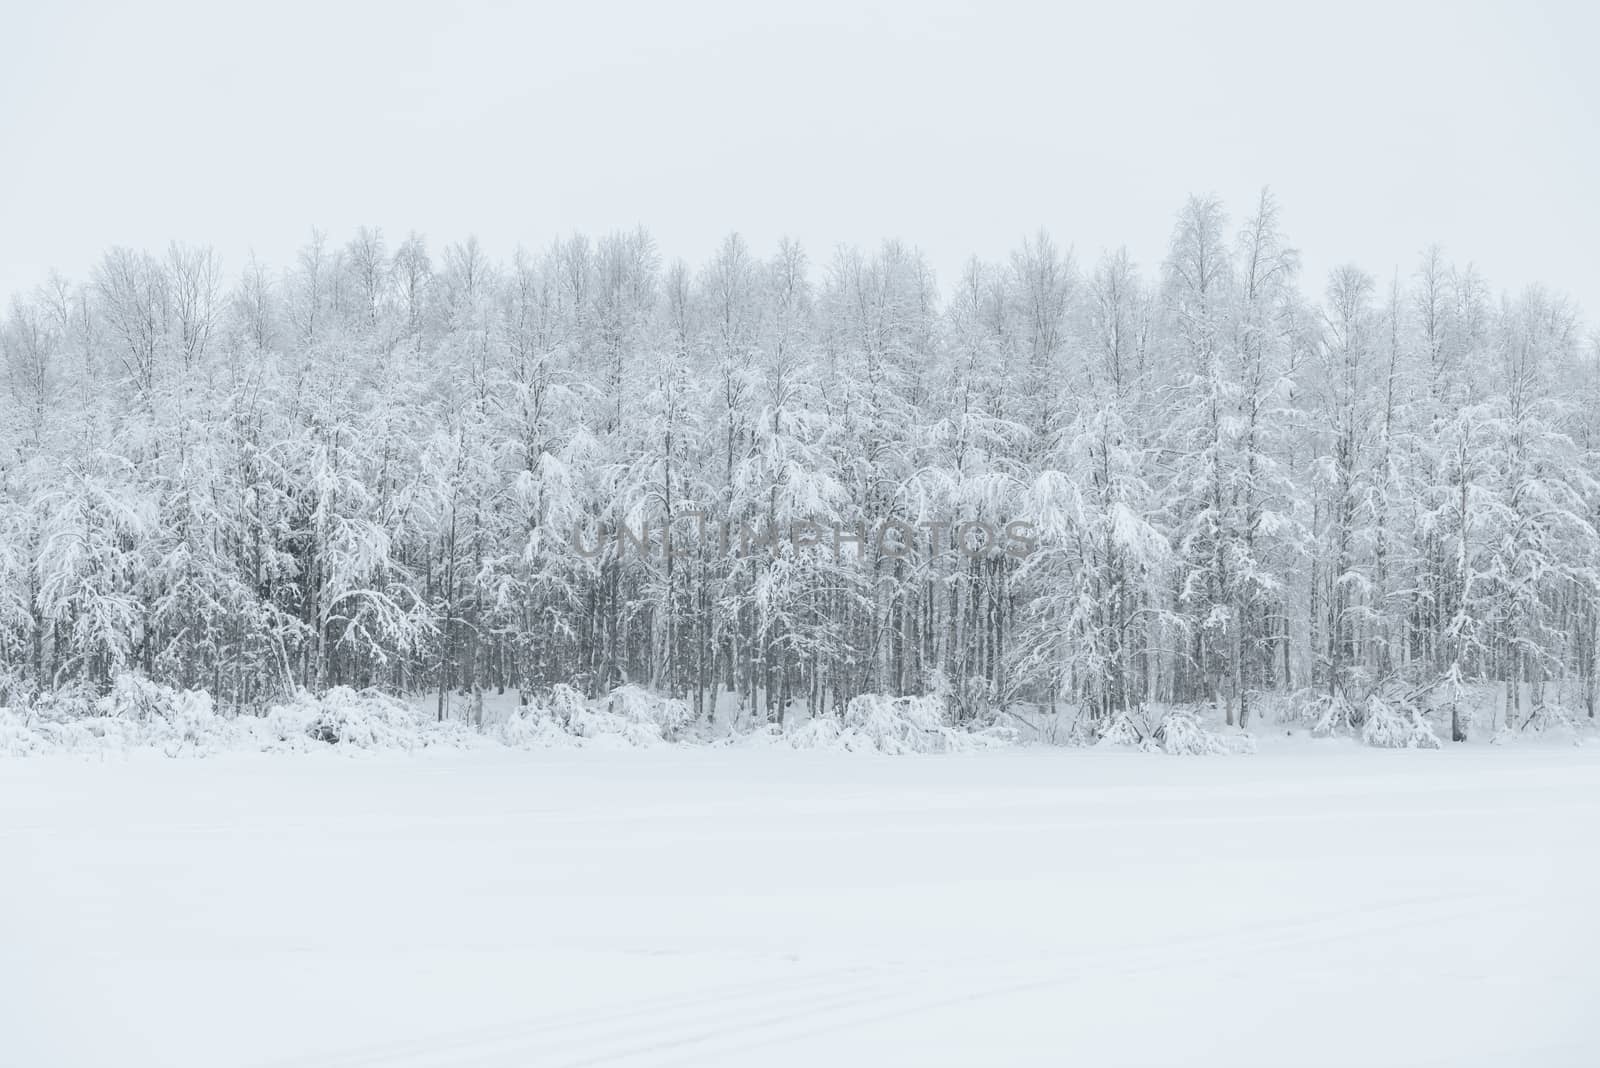 The ice lake and forest has covered with heavy snow and bad weather sky in winter season at Holiday Village Kuukiuru, Finland.